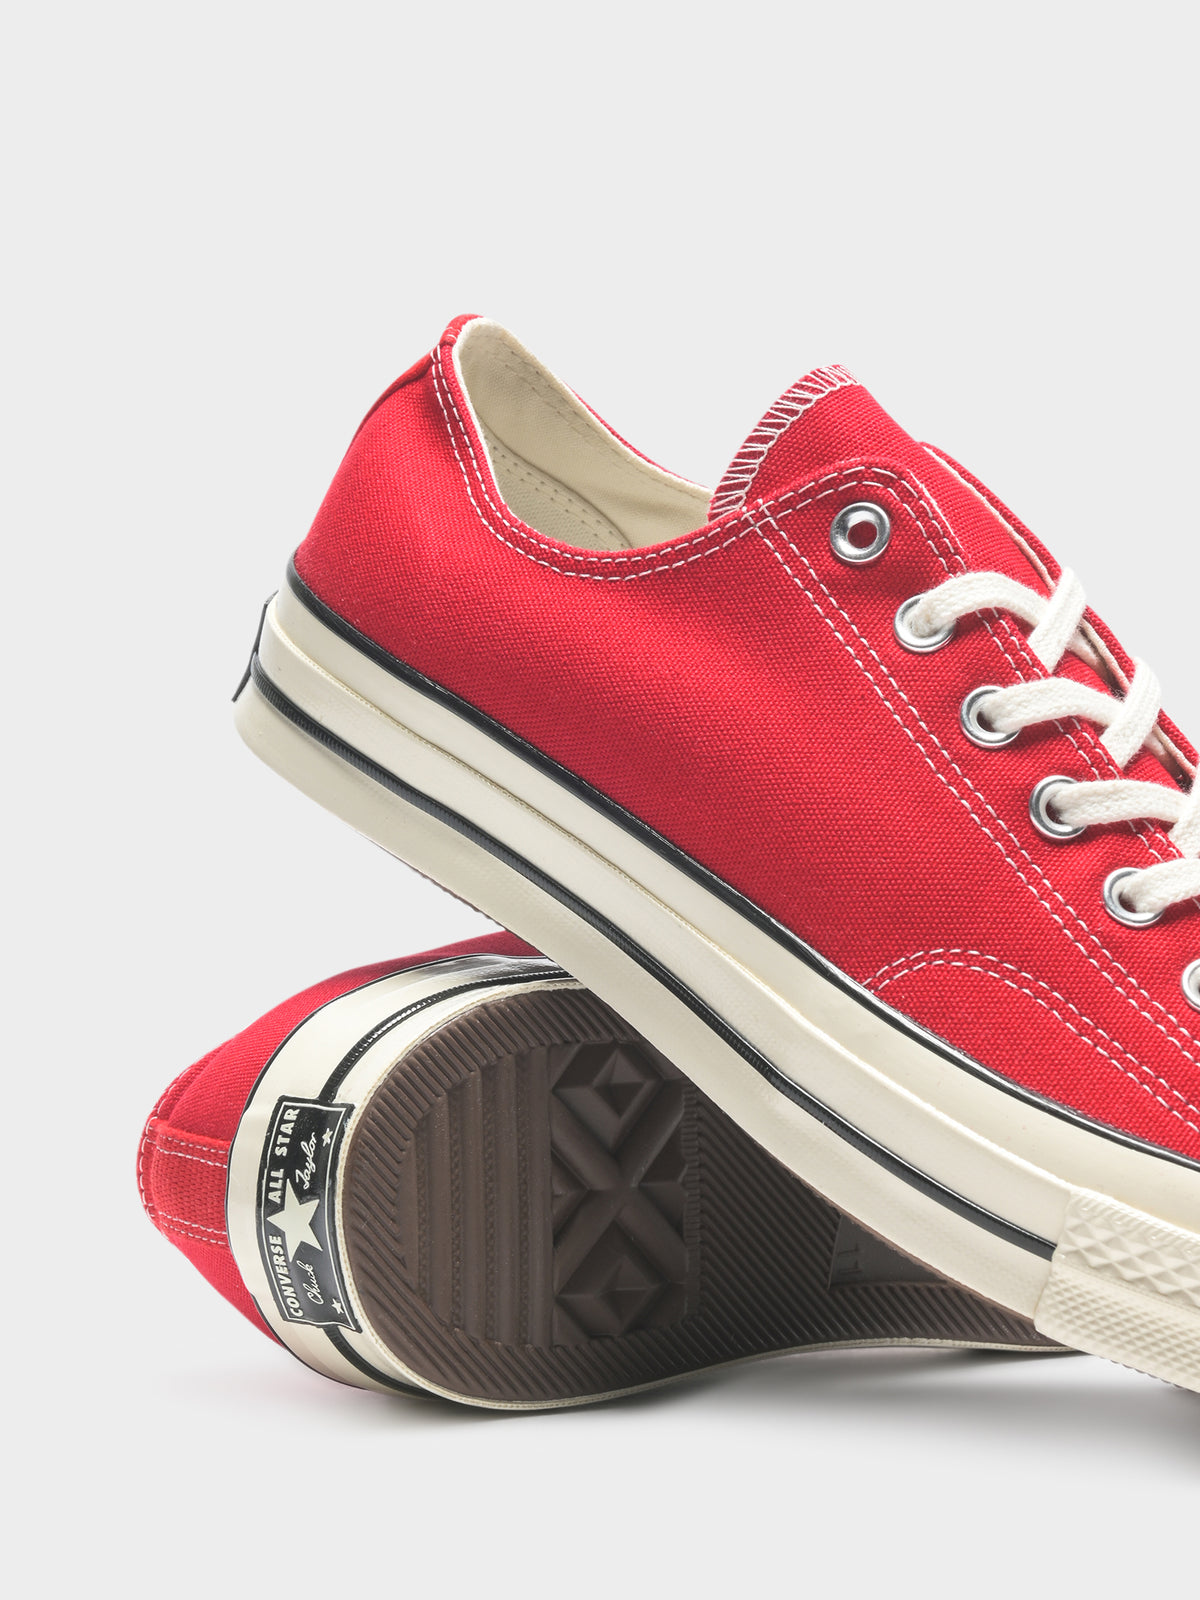 Unisex Chuck Taylor 70 Vintage Canvas Sneaker in Red